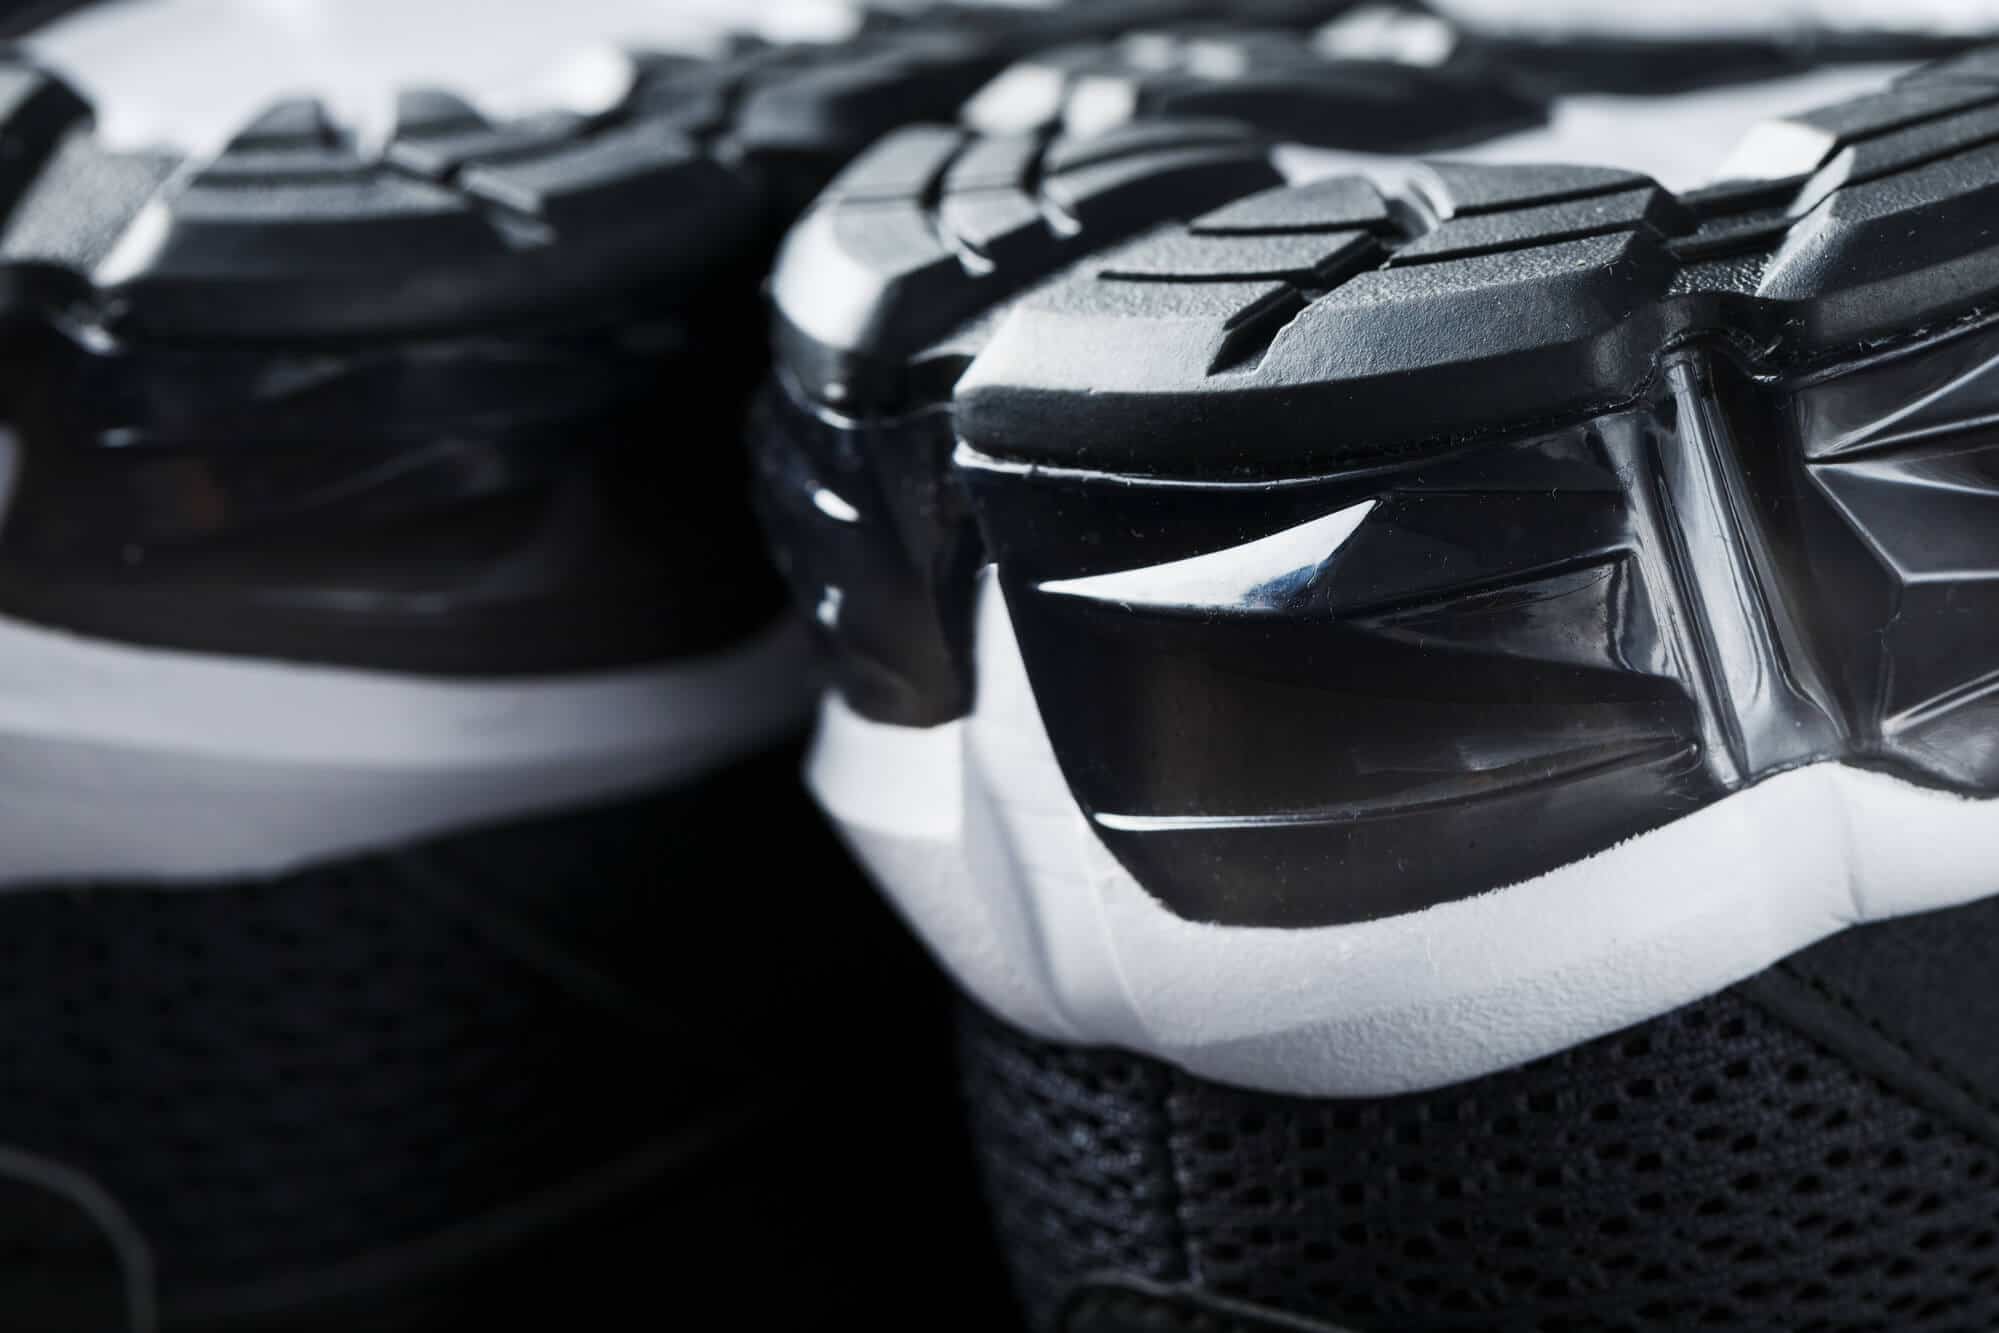 Close-up of black and white gel cushioning sports shoe sole